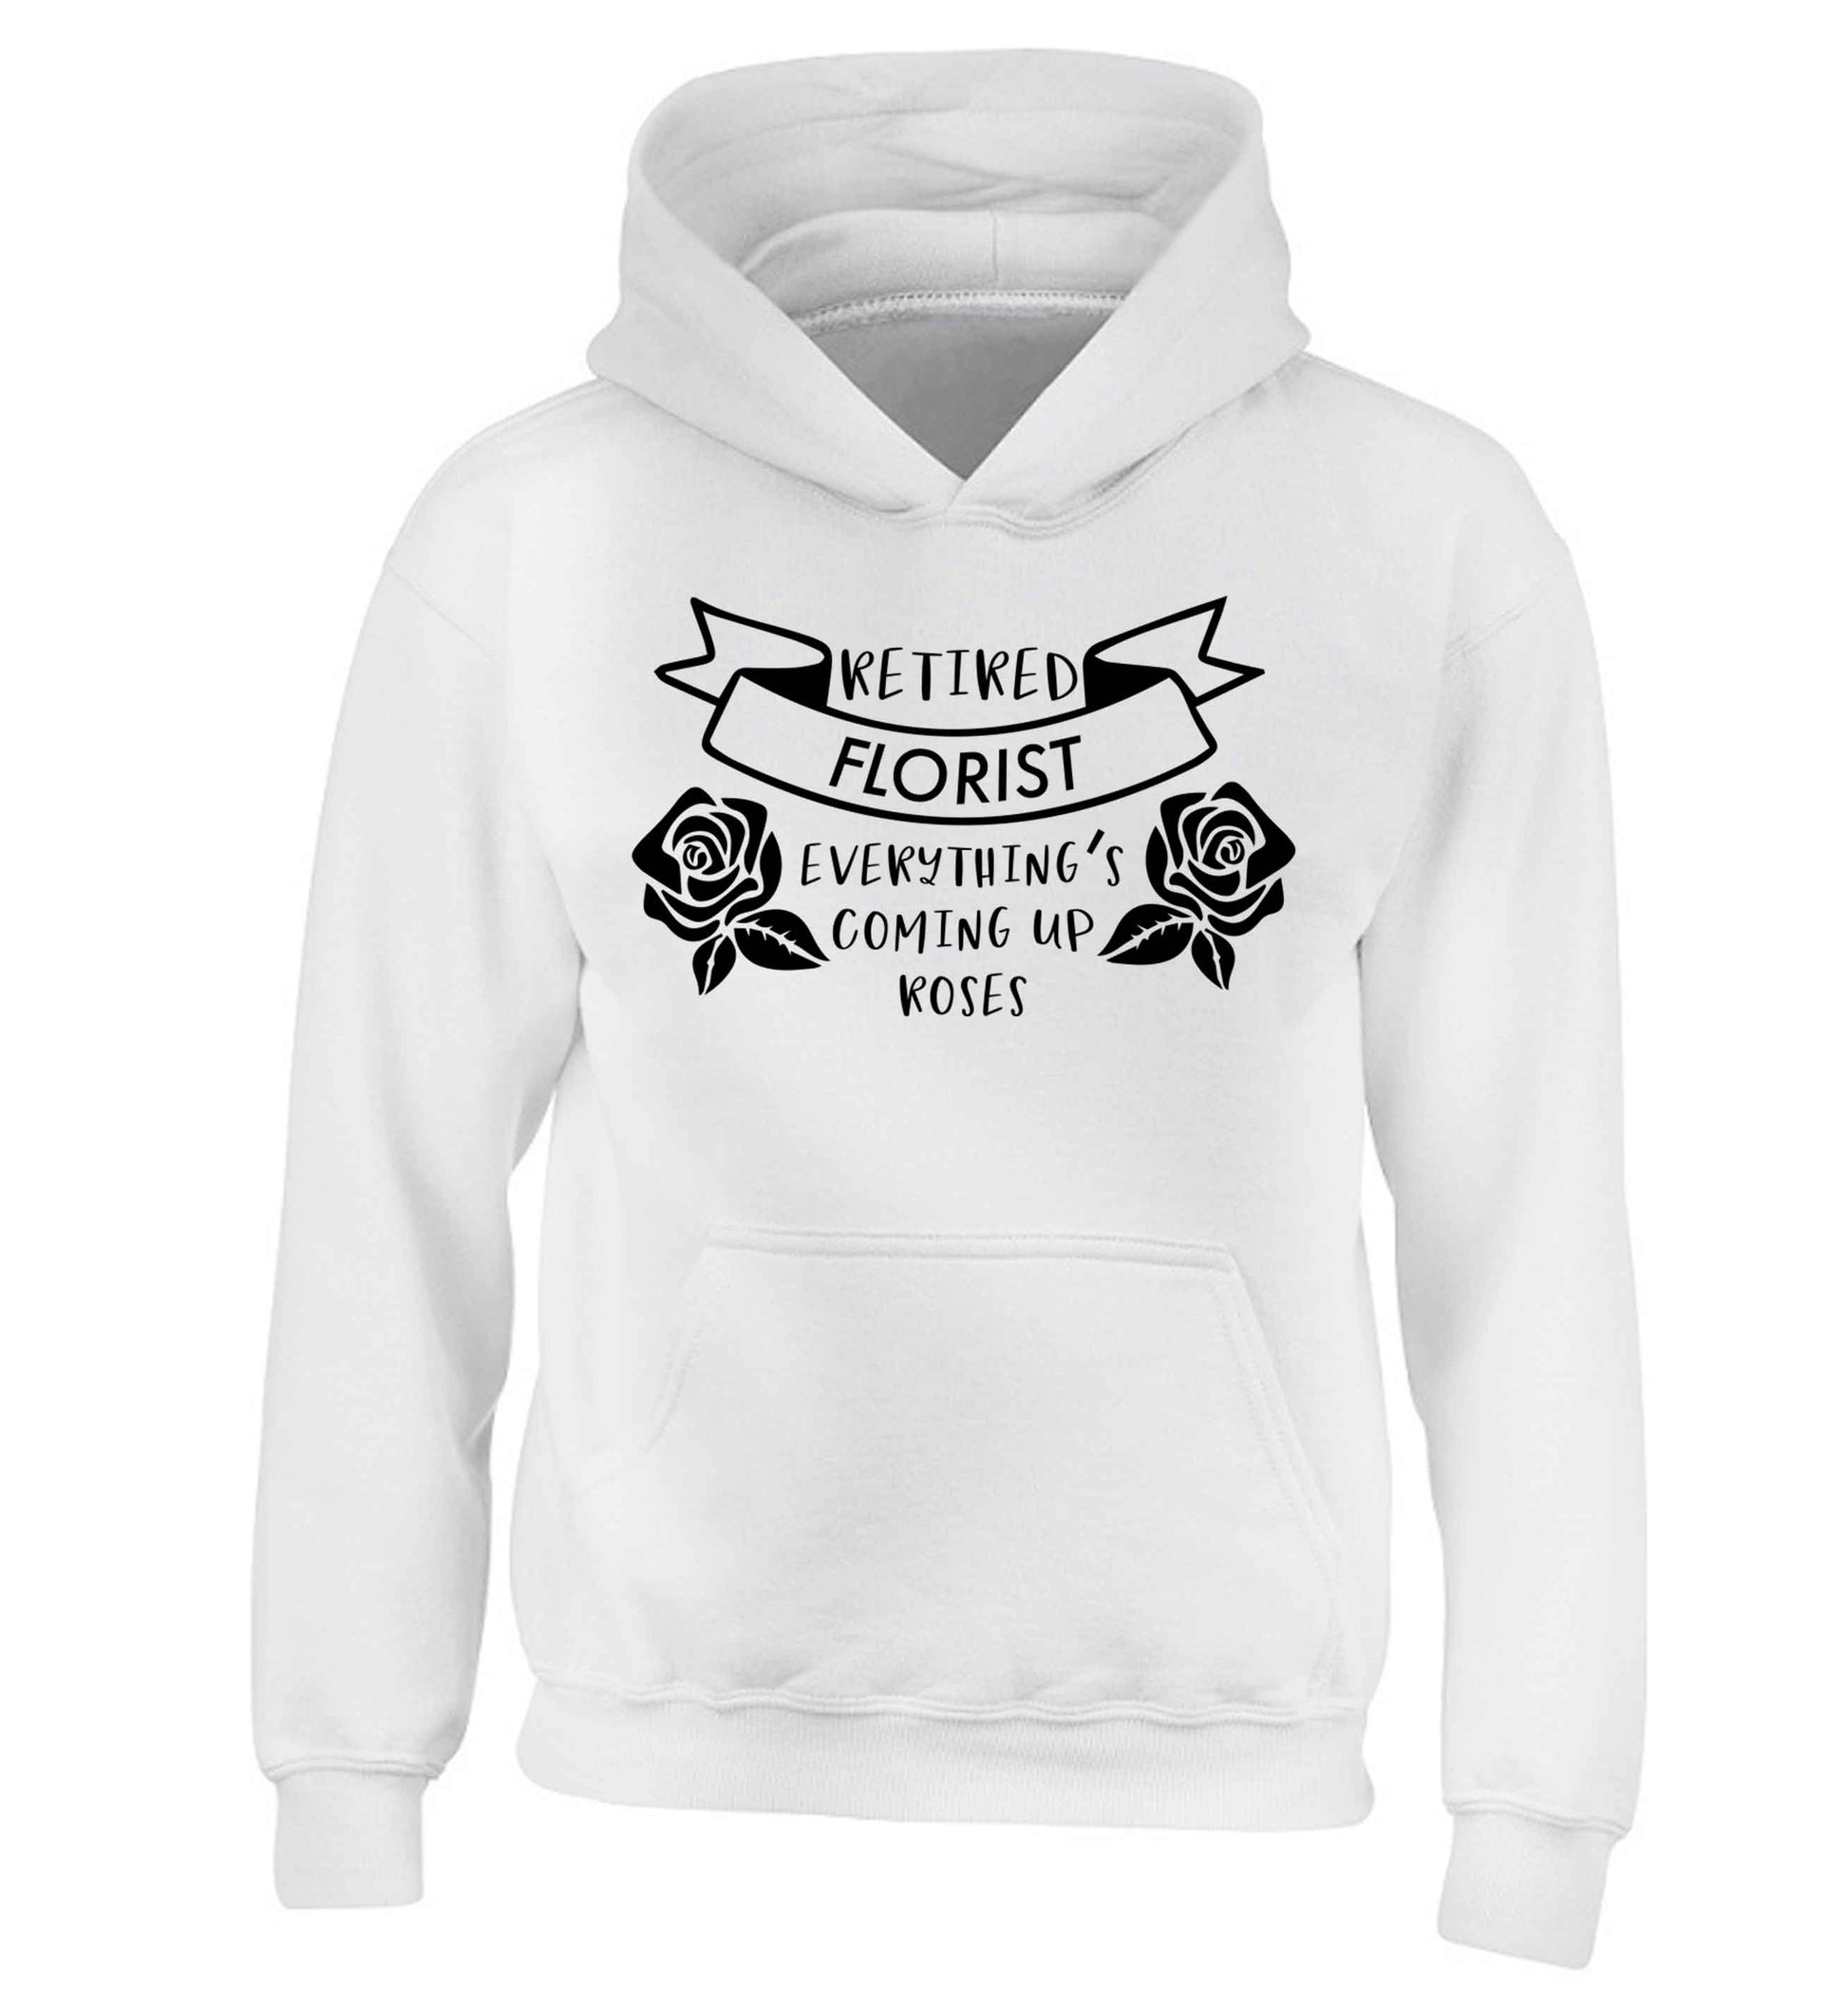 Retired florist everything's coming up roses children's white hoodie 12-13 Years